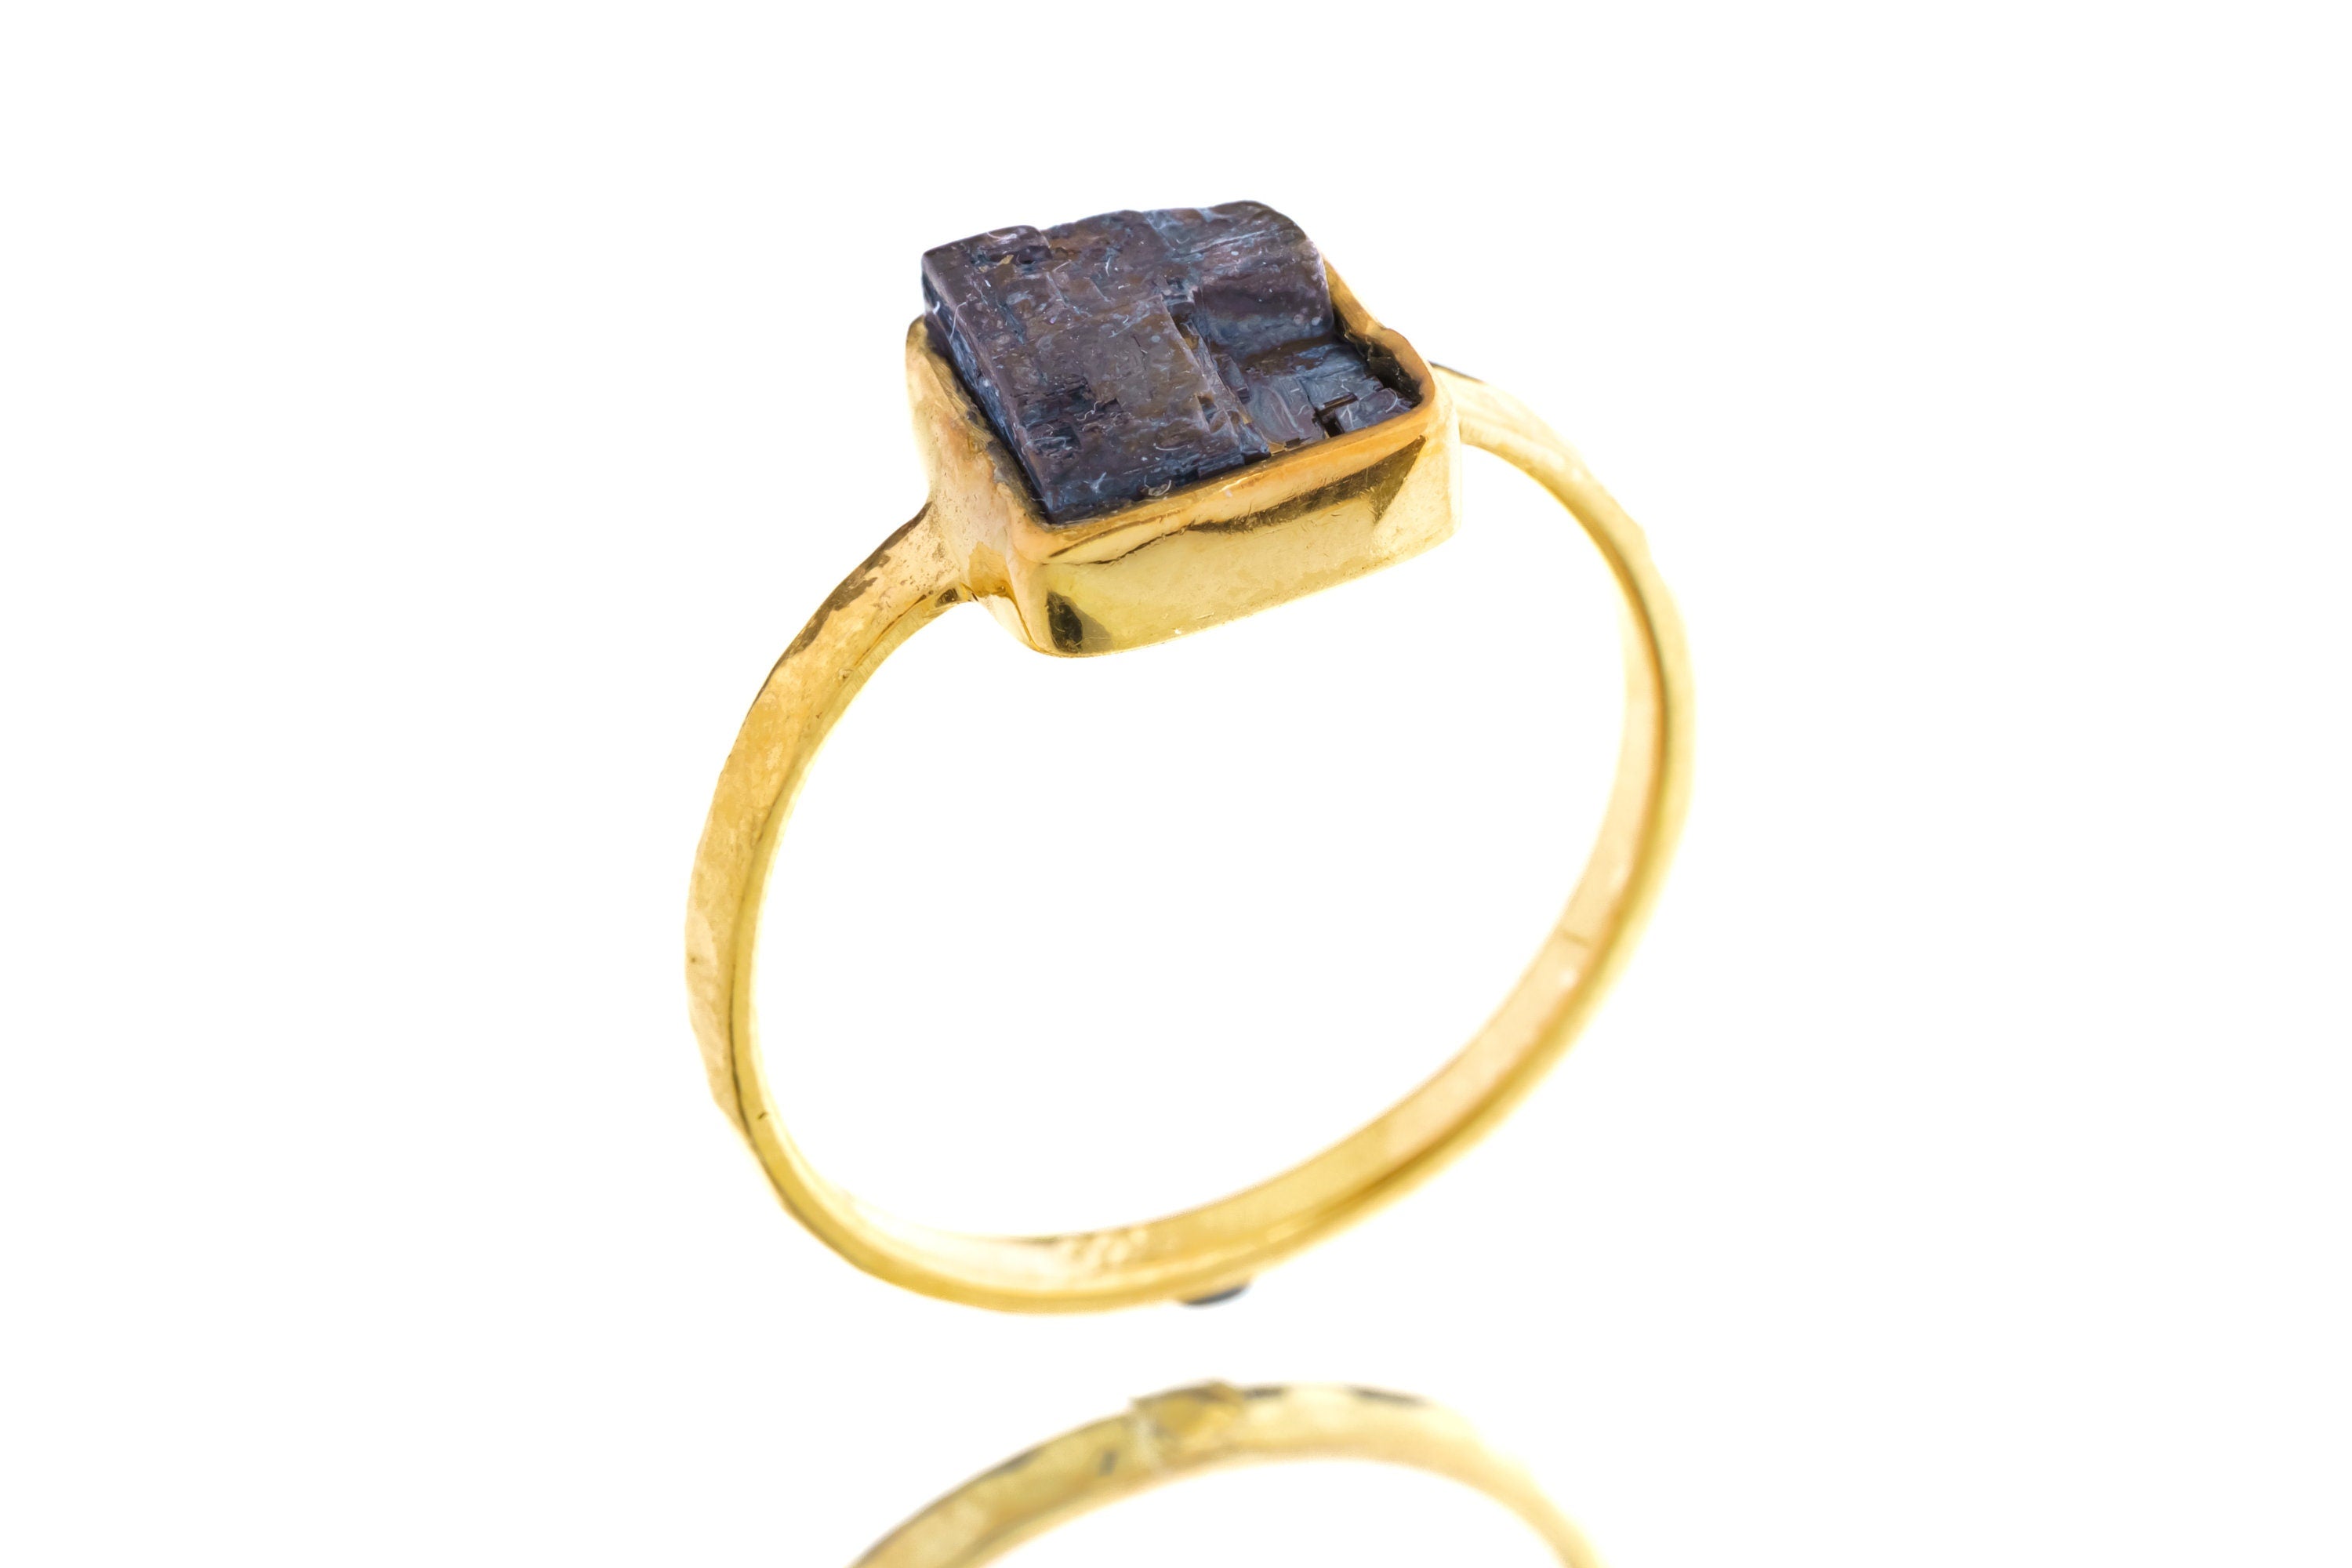 Gold Kissed Australian Cubic Pyrite - Stack Crystal Ring - Size 5 1/2 US - Gold Plated 925 Sterling Silver - Thin Band Hammer Textured